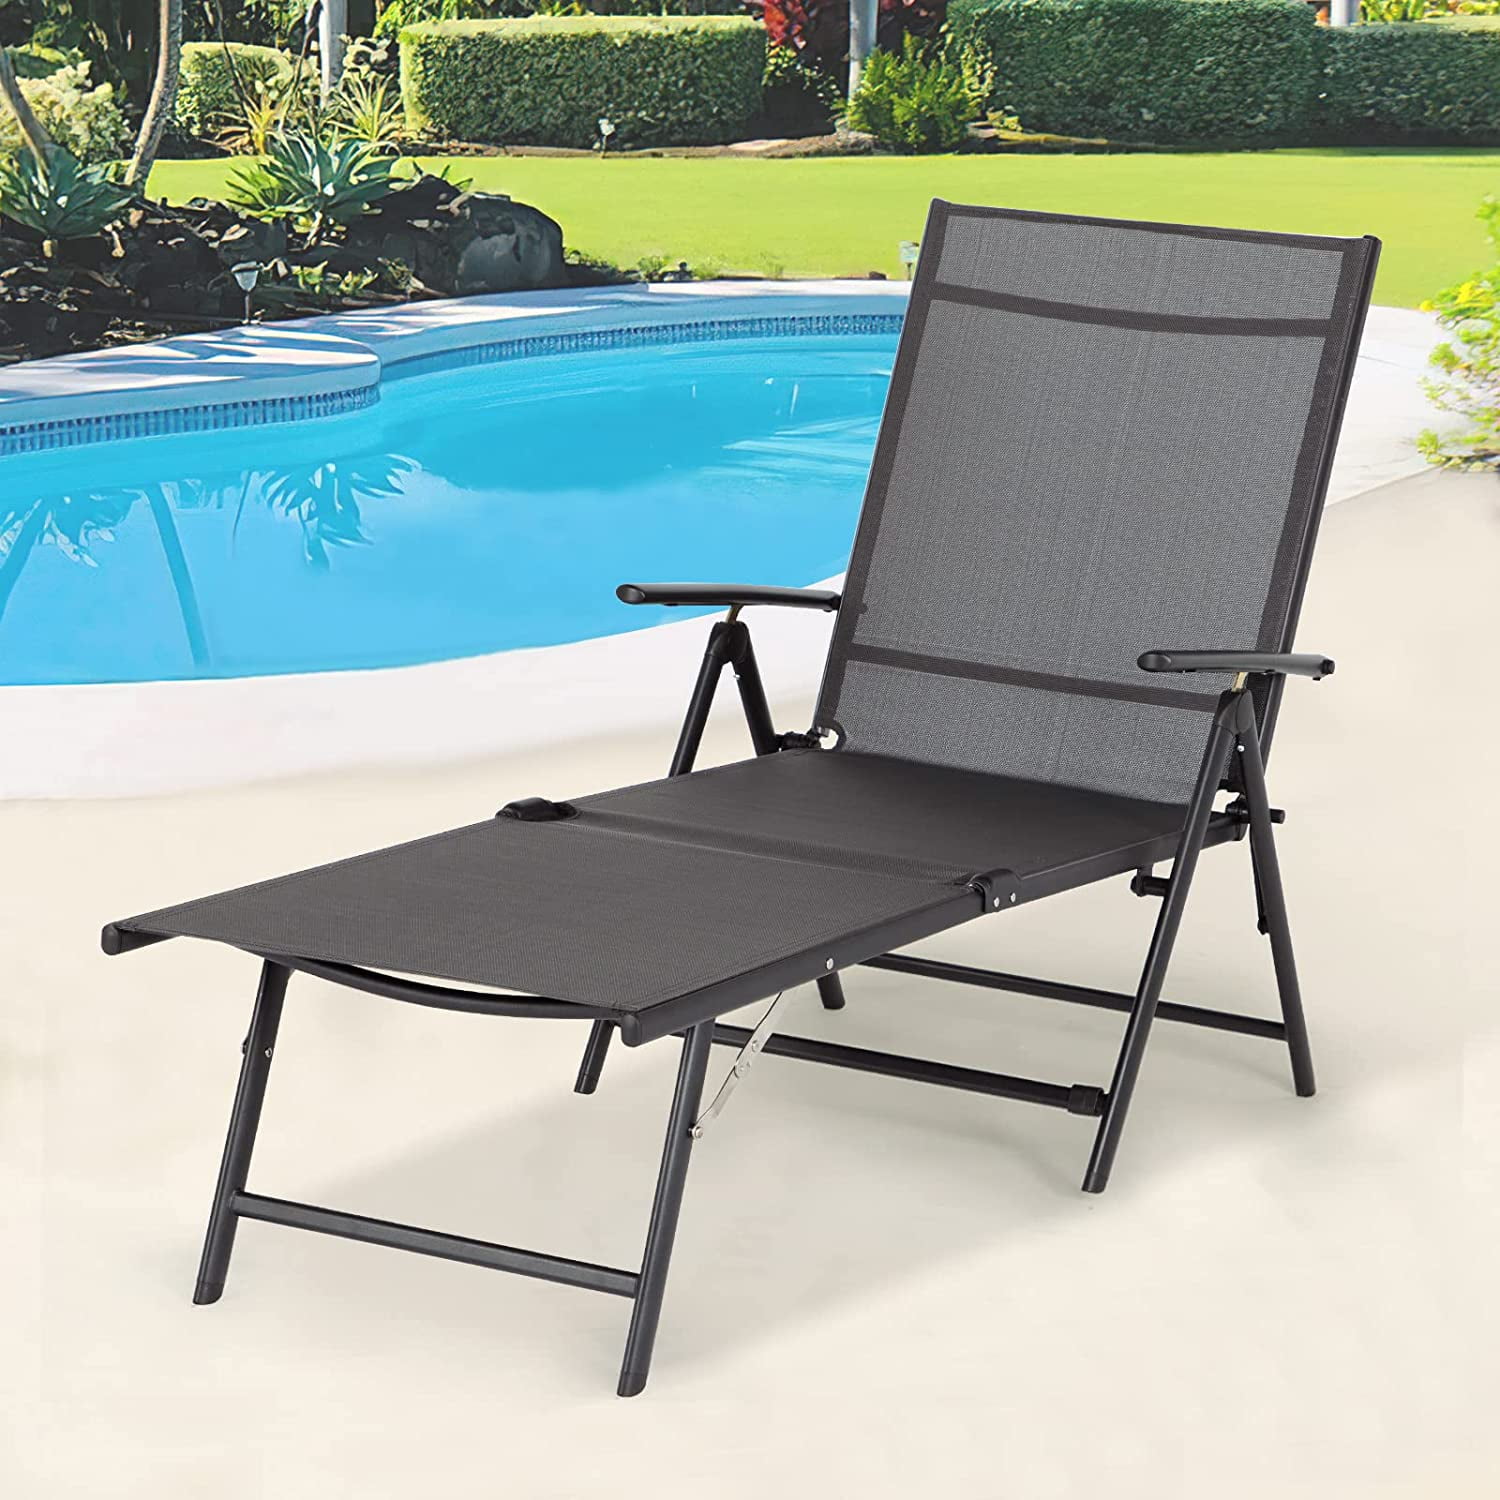 Details about   Outdoor Folding Chair Reclining Beach Sun Patio Chaise Lounge Chair 44*18*33 in 